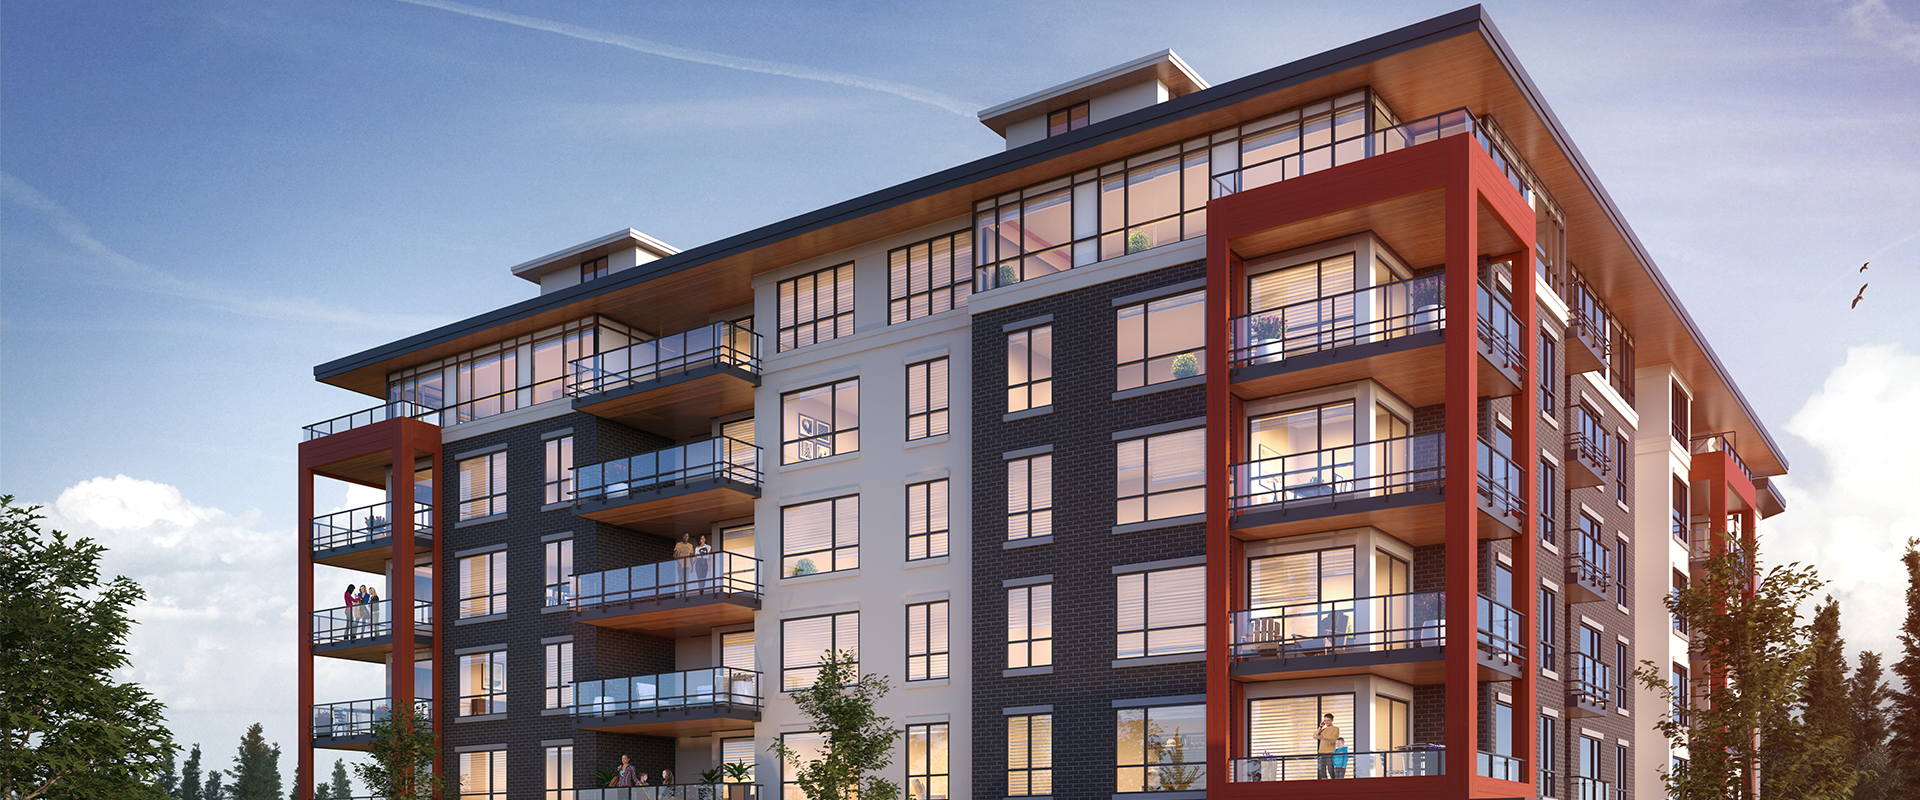 Modern Vancouver Townhomes at Virtuoso by Adera